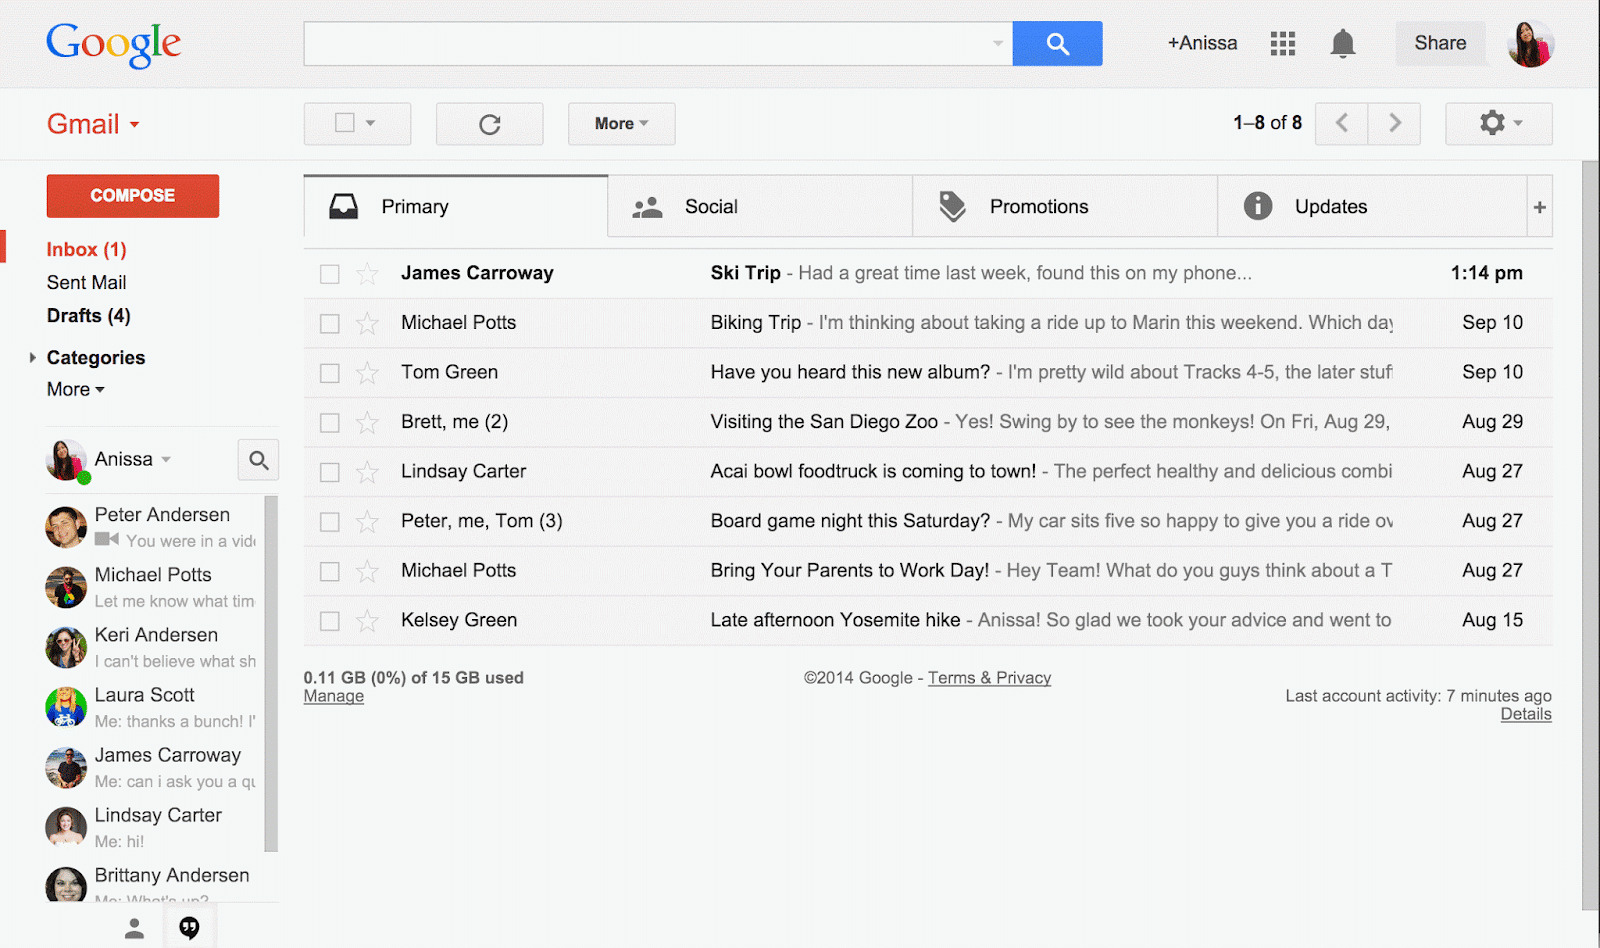 An image of a Gmail inbox